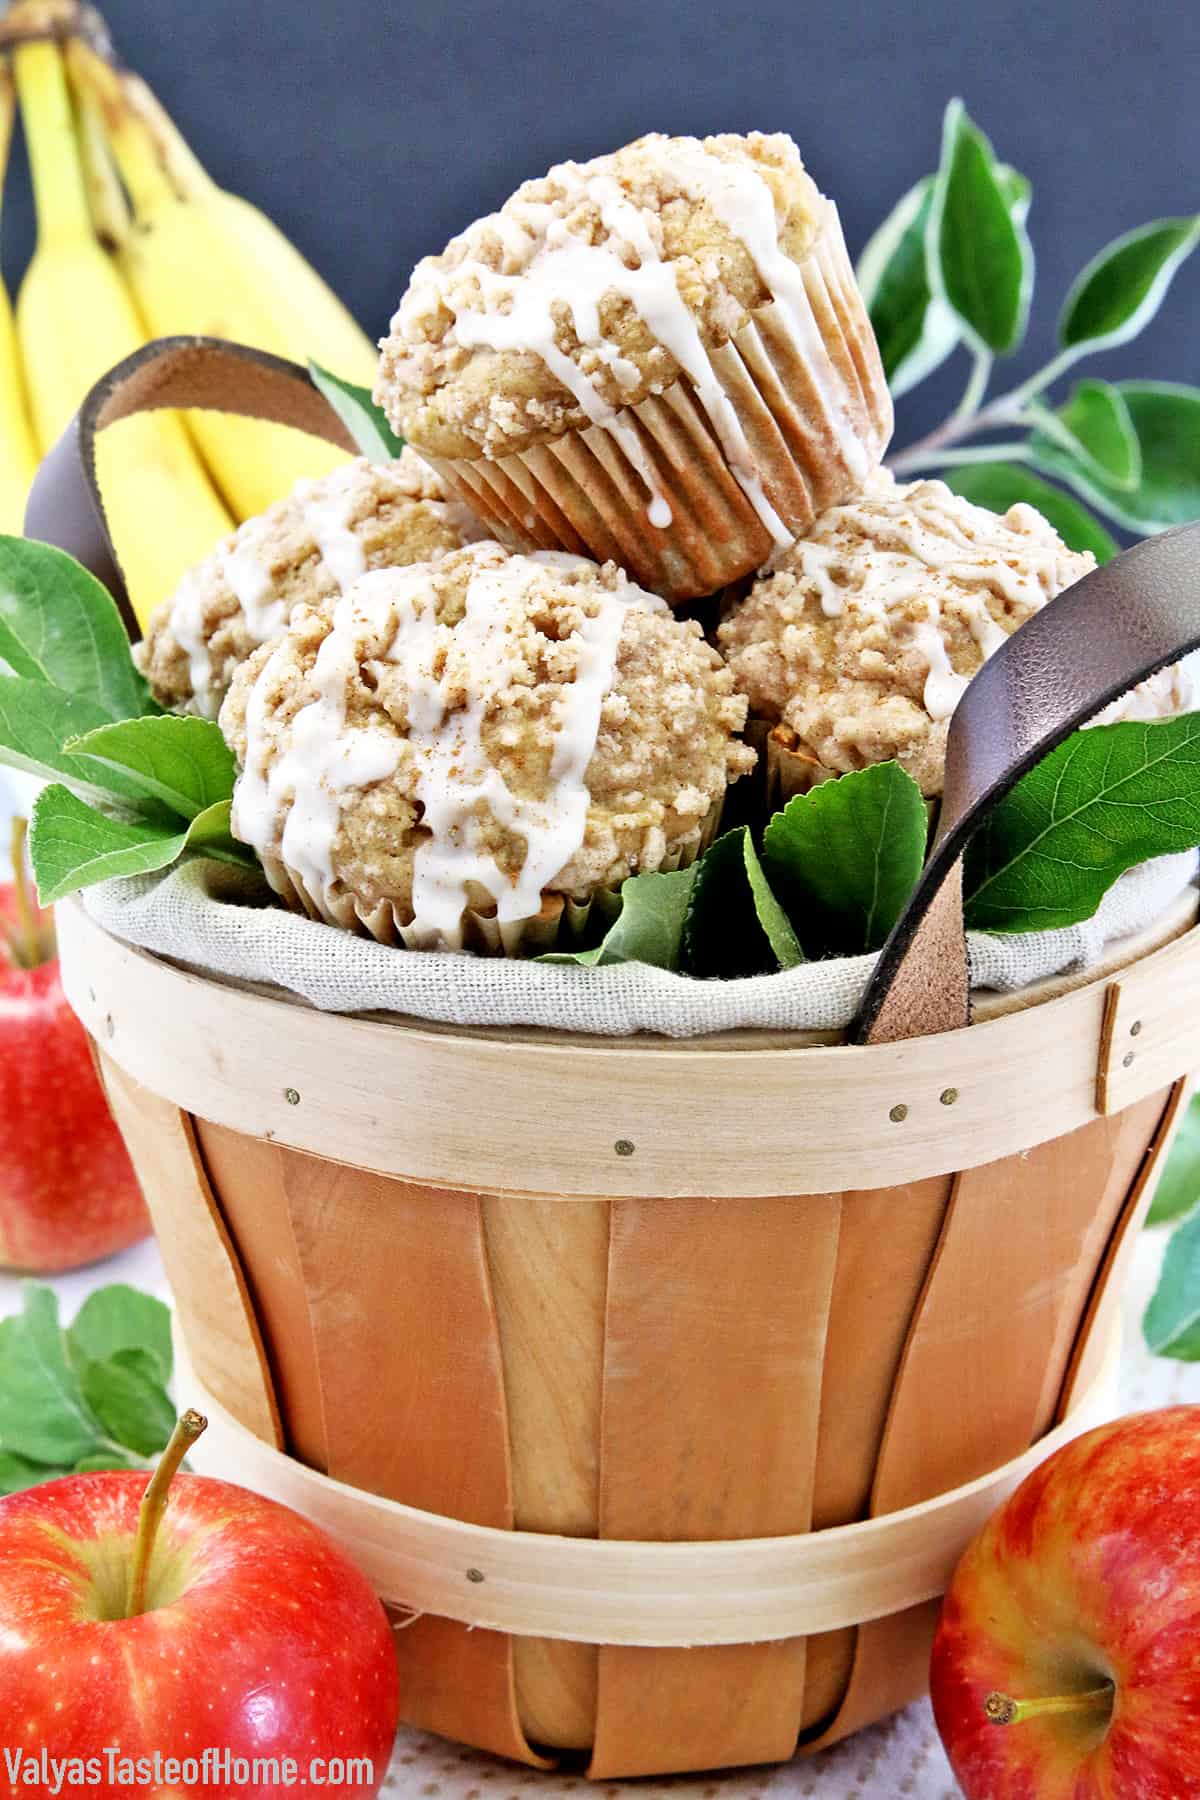 Today, I’d like to share with you our family's favorite apple treats in this 12  Must Make Apple Recipes round up, to help us transition into the Fall season! This compilation of twelve delicious apple recipes (plus one bonus one) was posted over a period of 5 years of my blogging journey.  #mustmakeapplerecipes #deliciousrecipes #fallseasonrecipe #valyastasteofhome